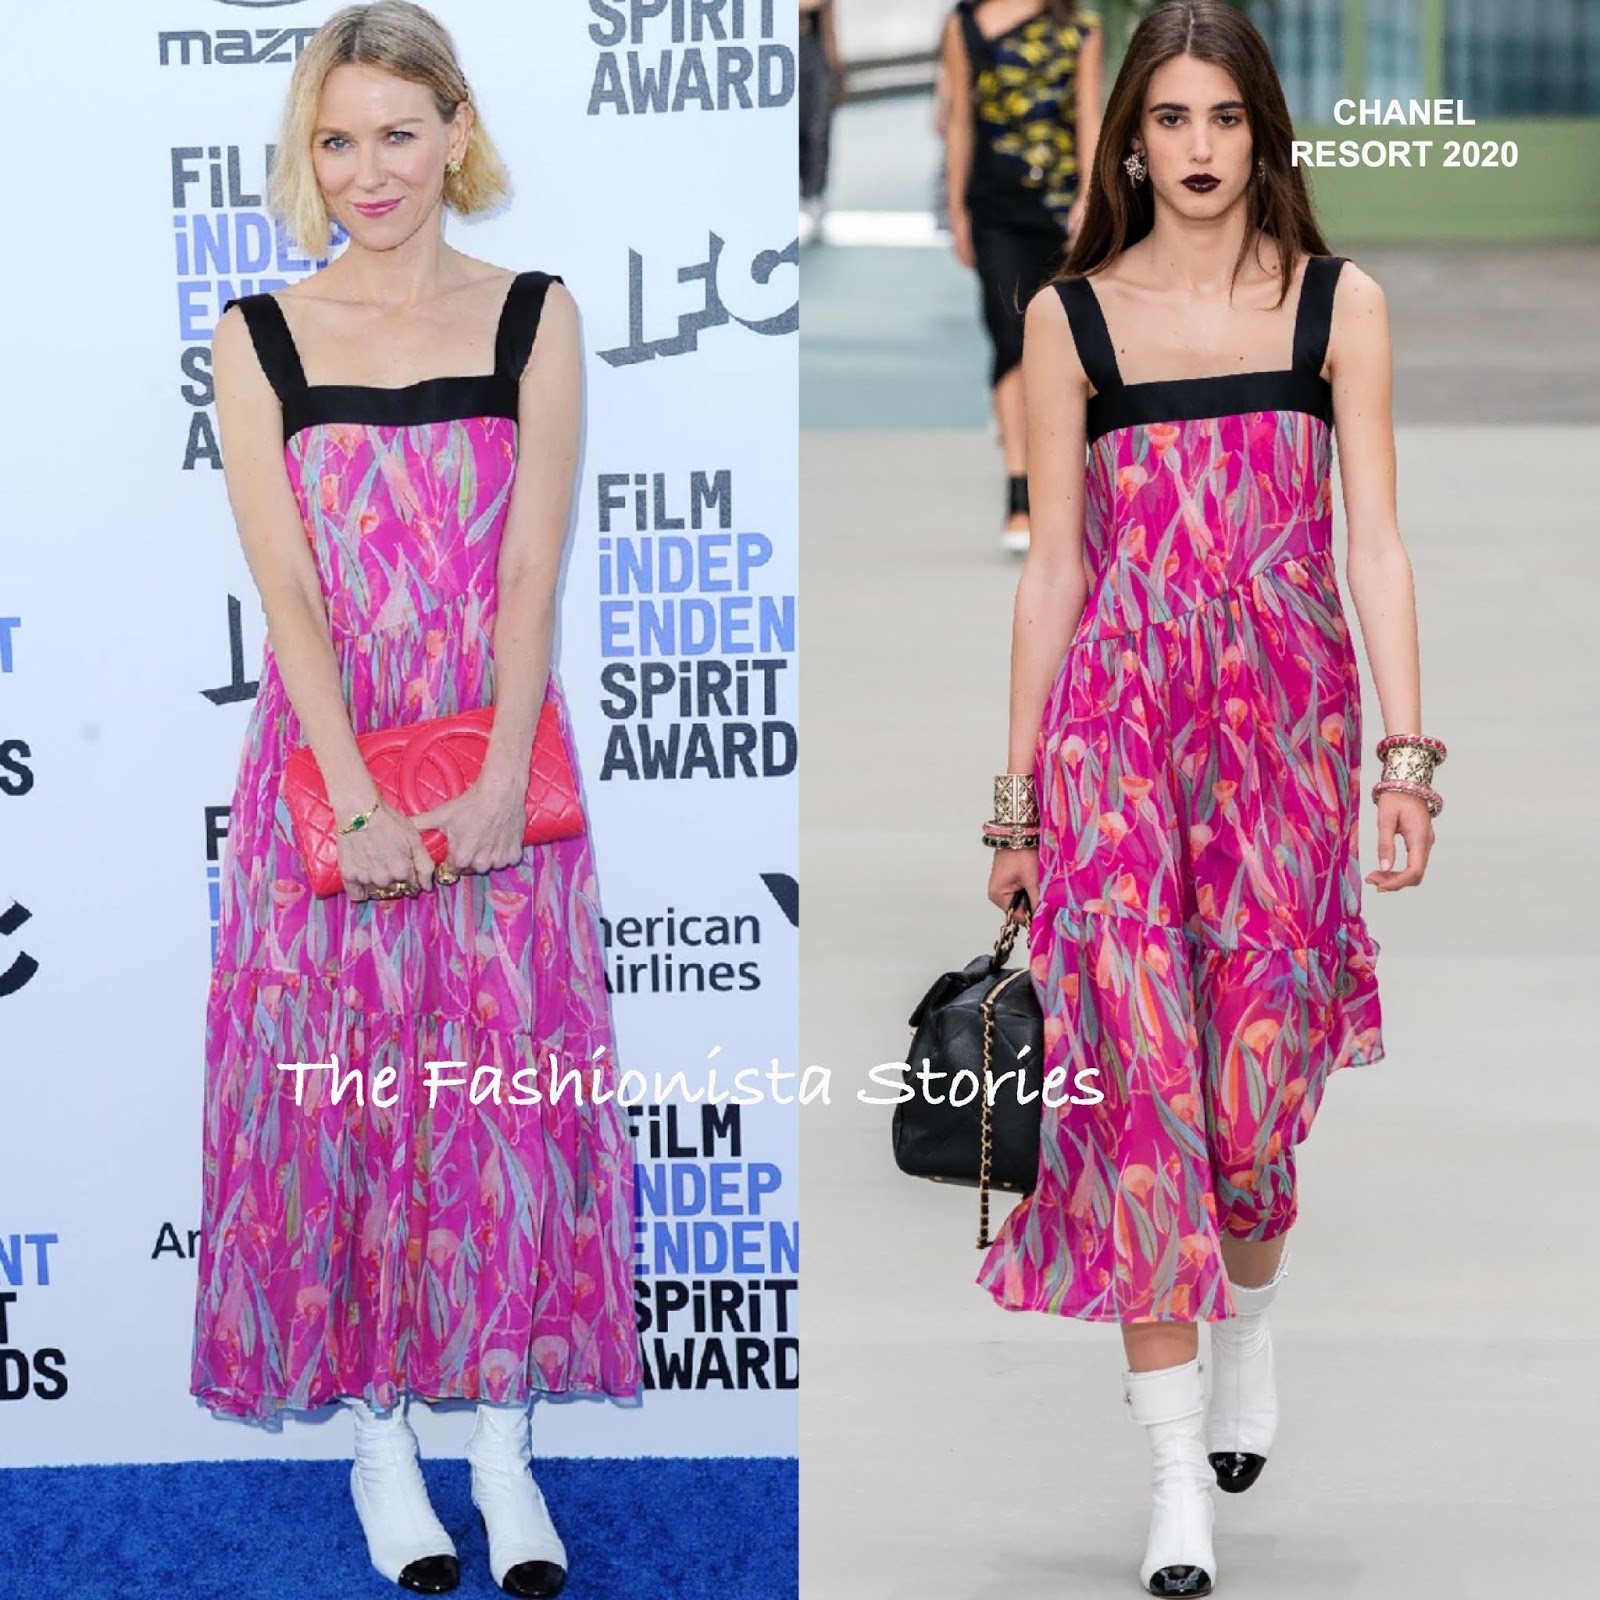 Margaret Qualley & Naomi Watts in Chanel at the 35th Film